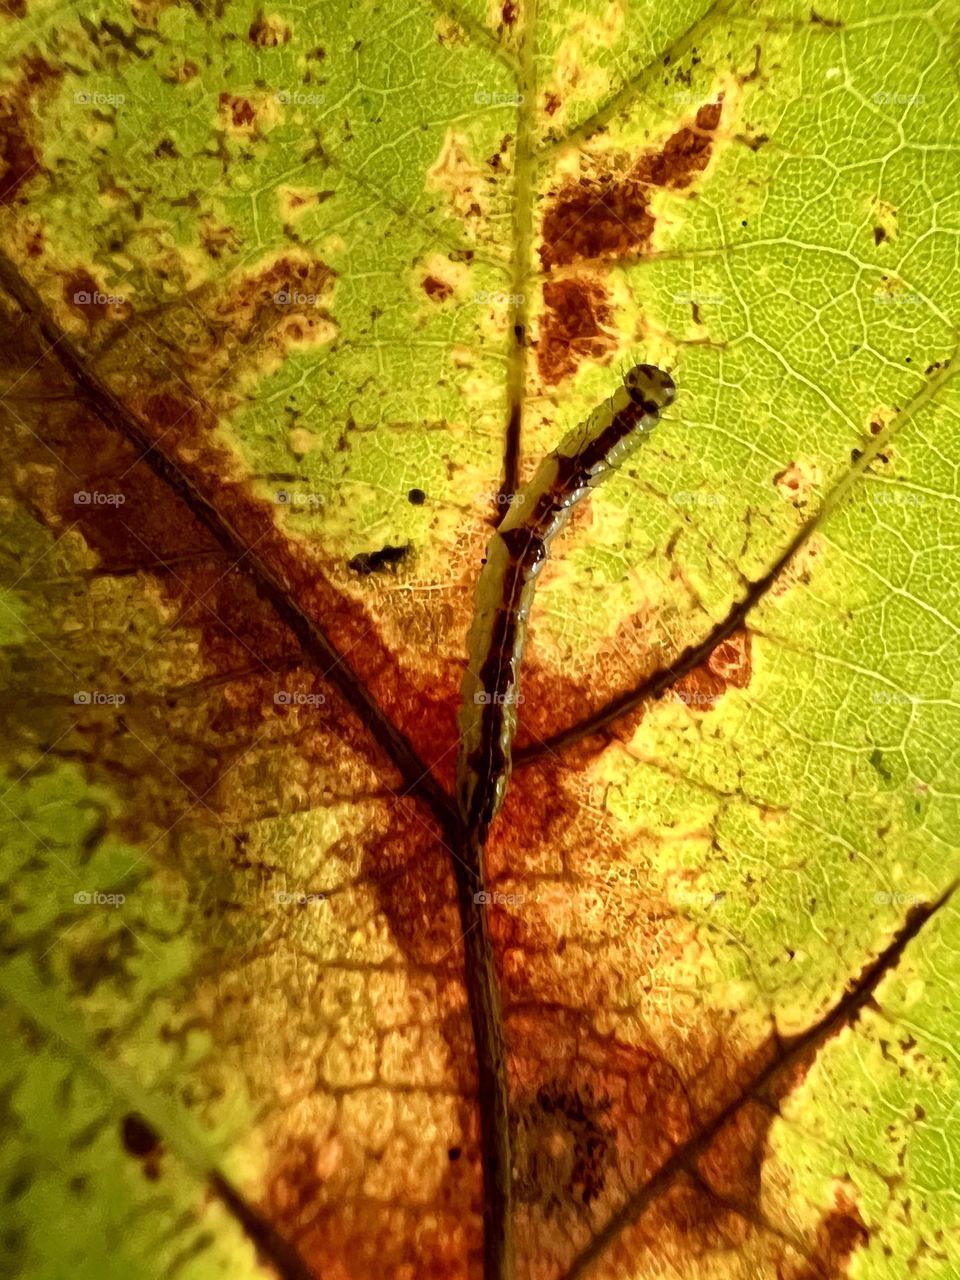 Small caterpillar is perfectly aligned with the veins of and oak leaf, as it changes color for fall.